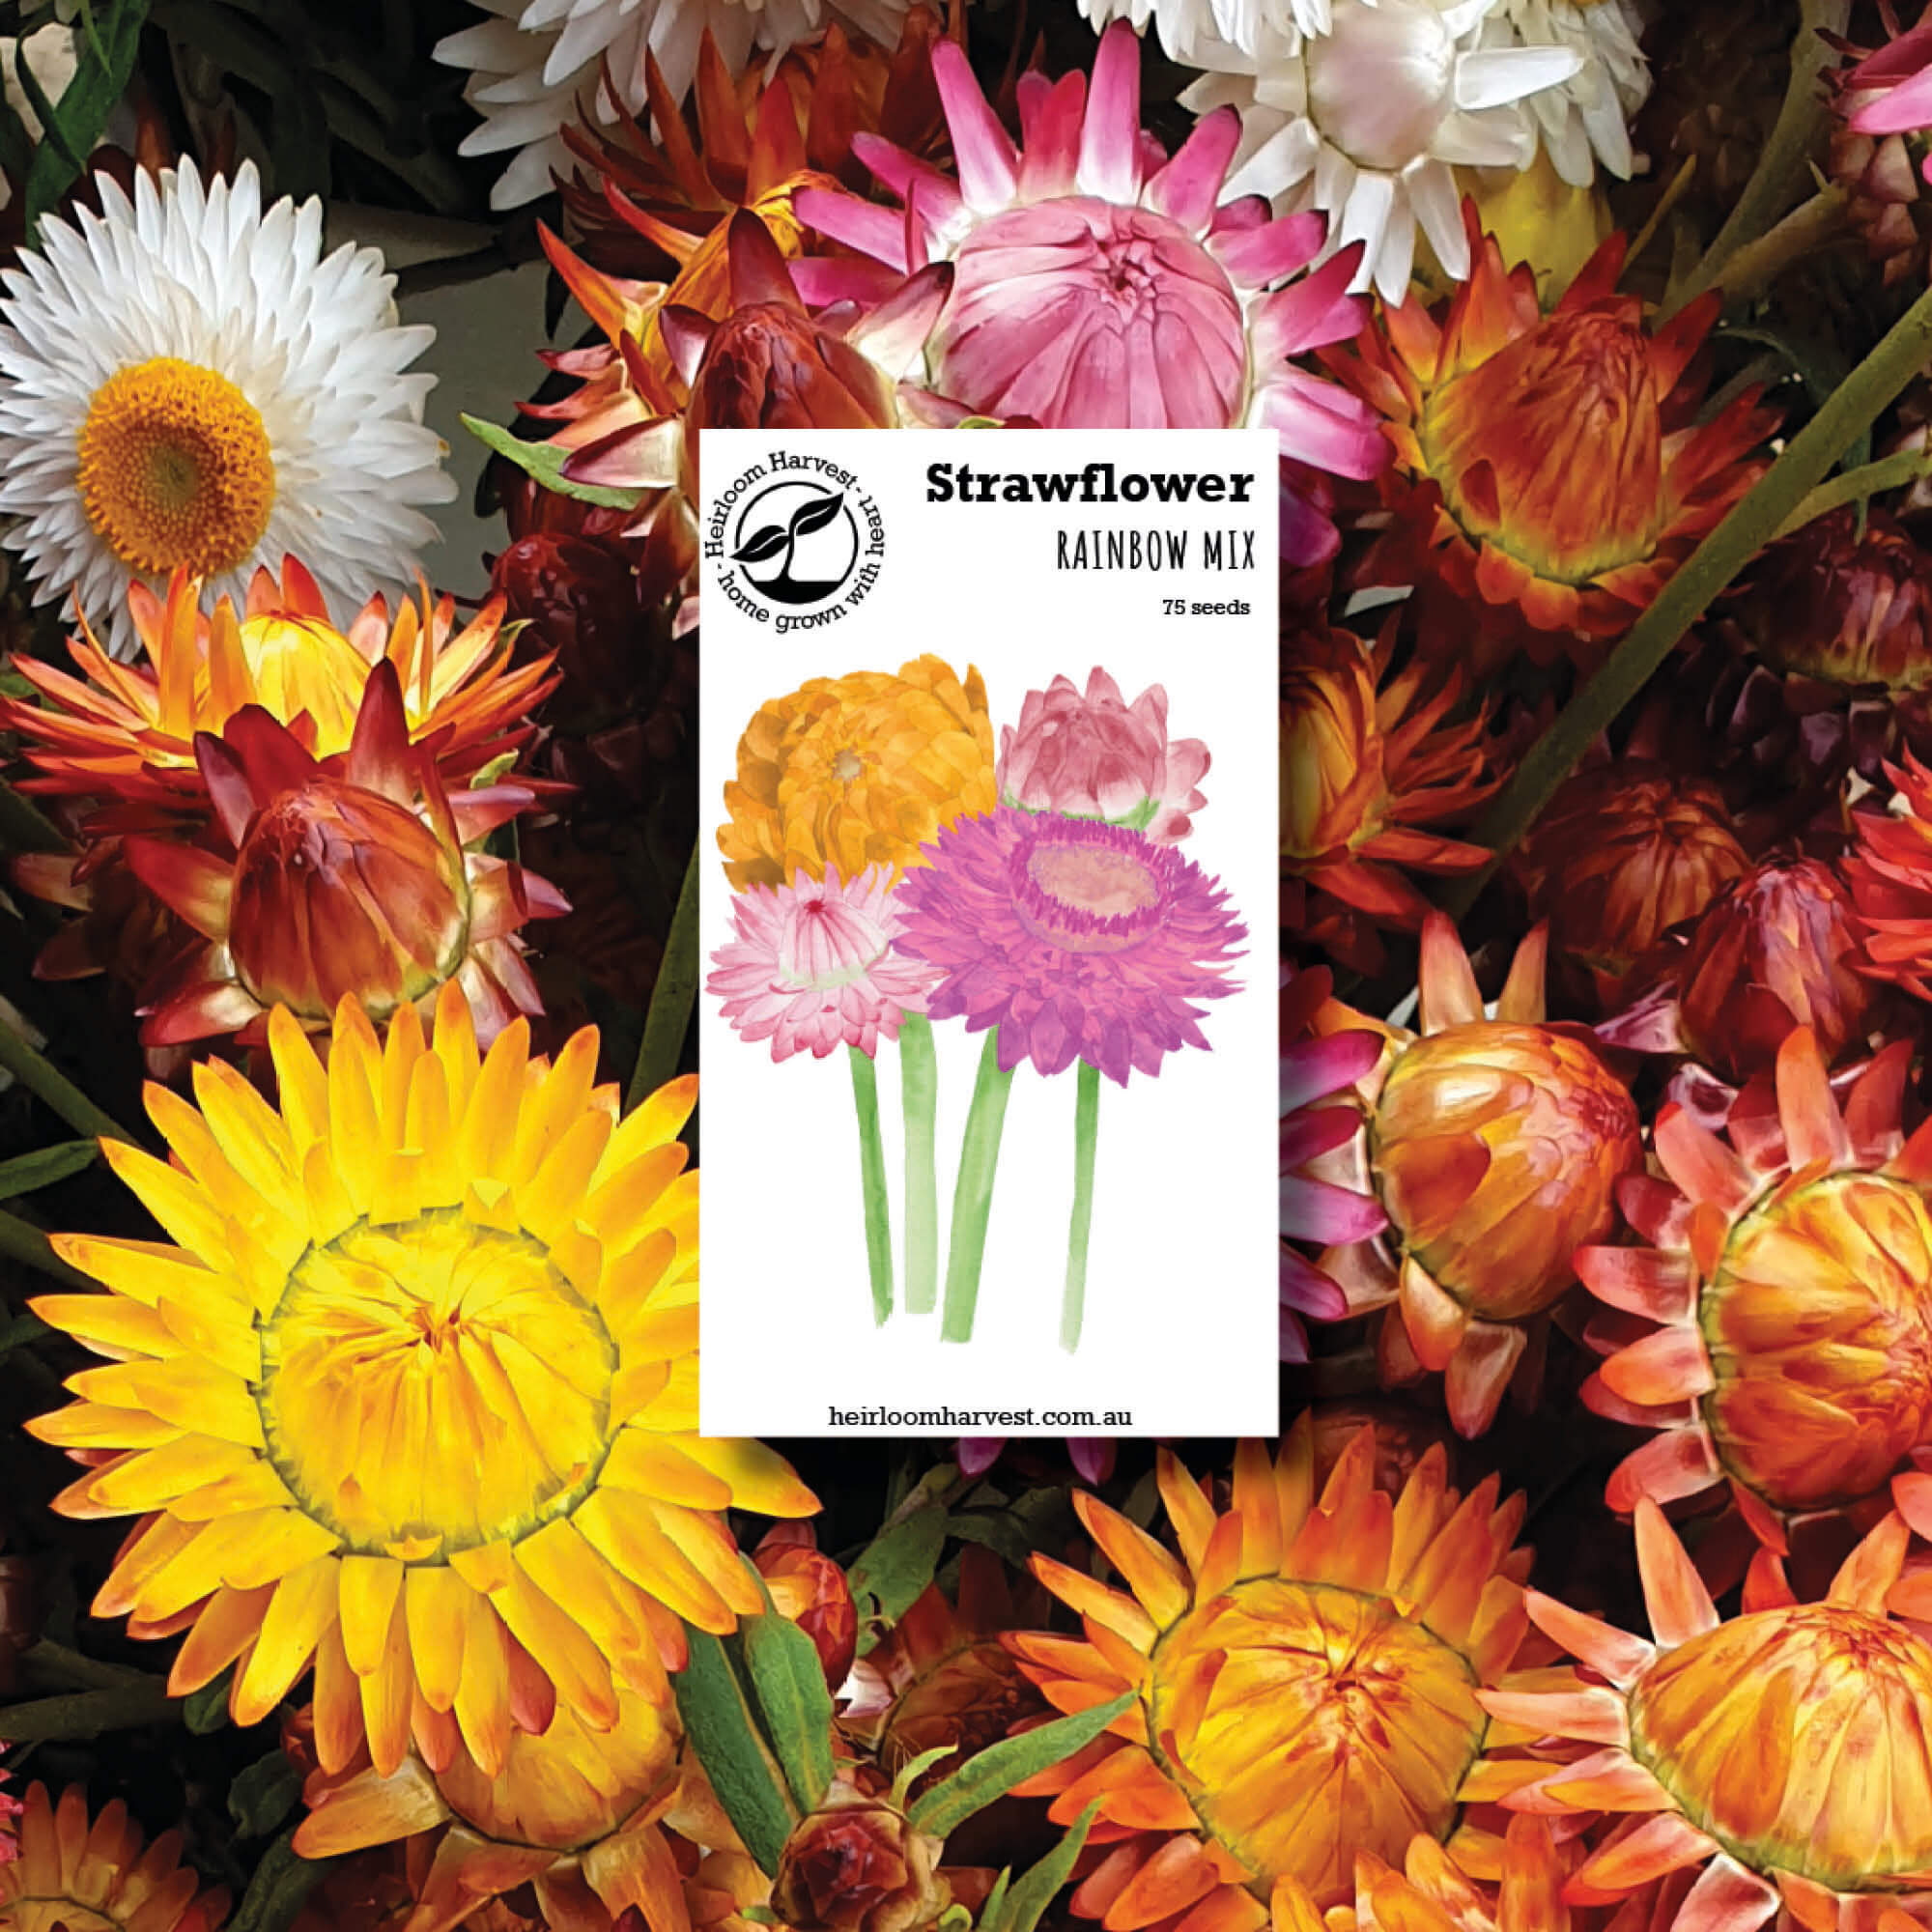 Strawflower Organic flower seeds made by Heirloom Harvest in Australia from Your Wild Books